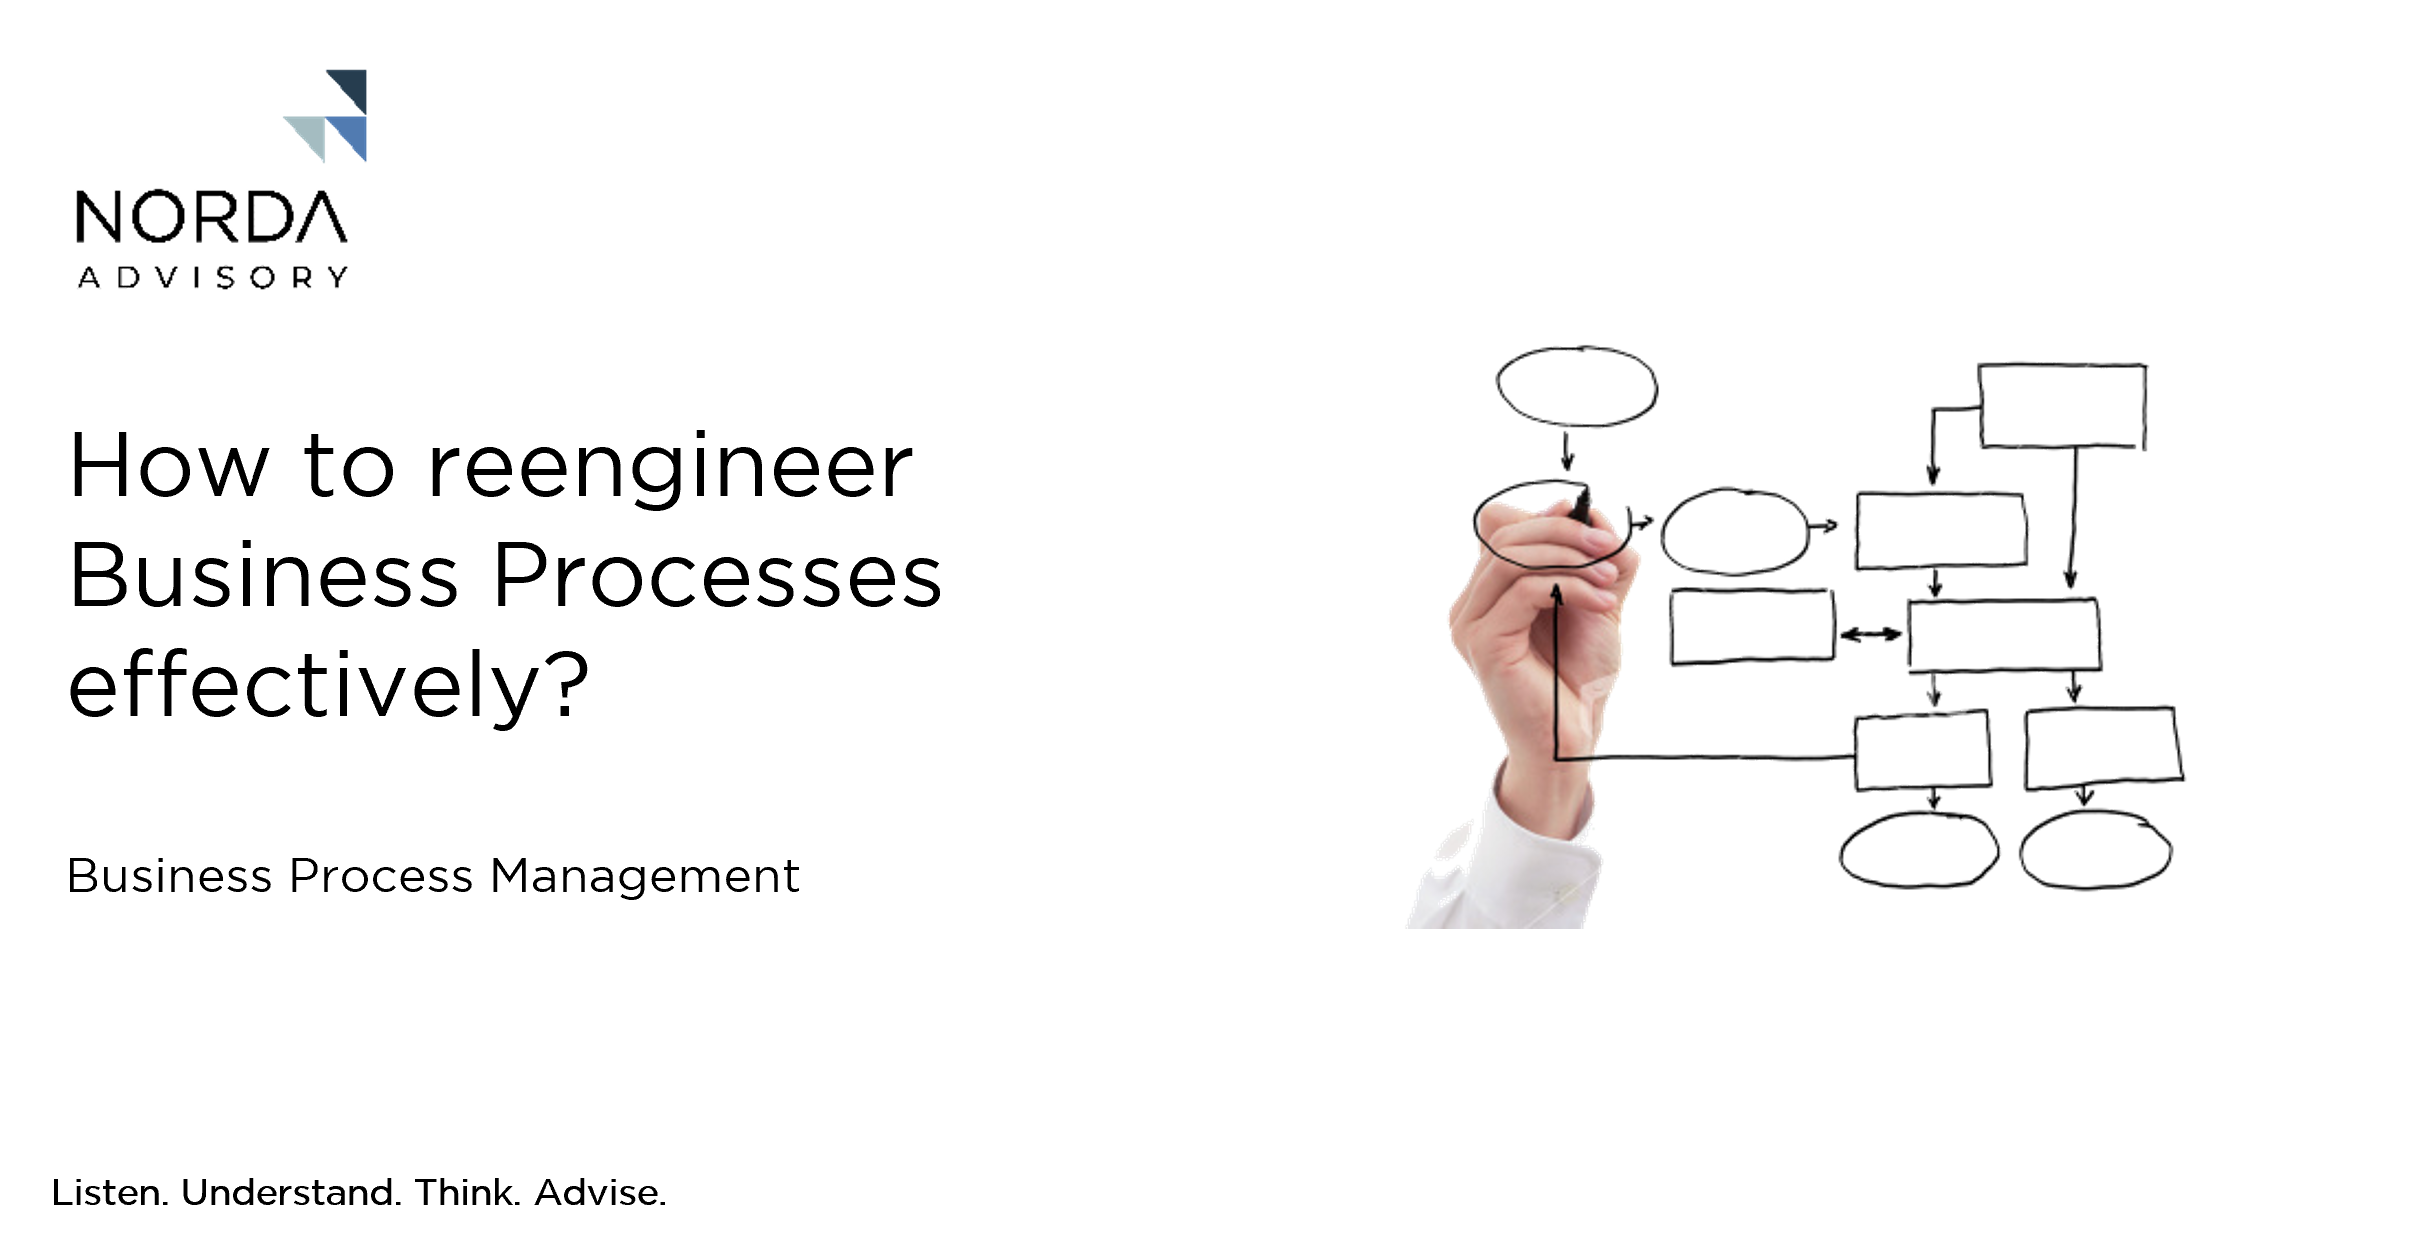 How to reengineer Business Processes effectively